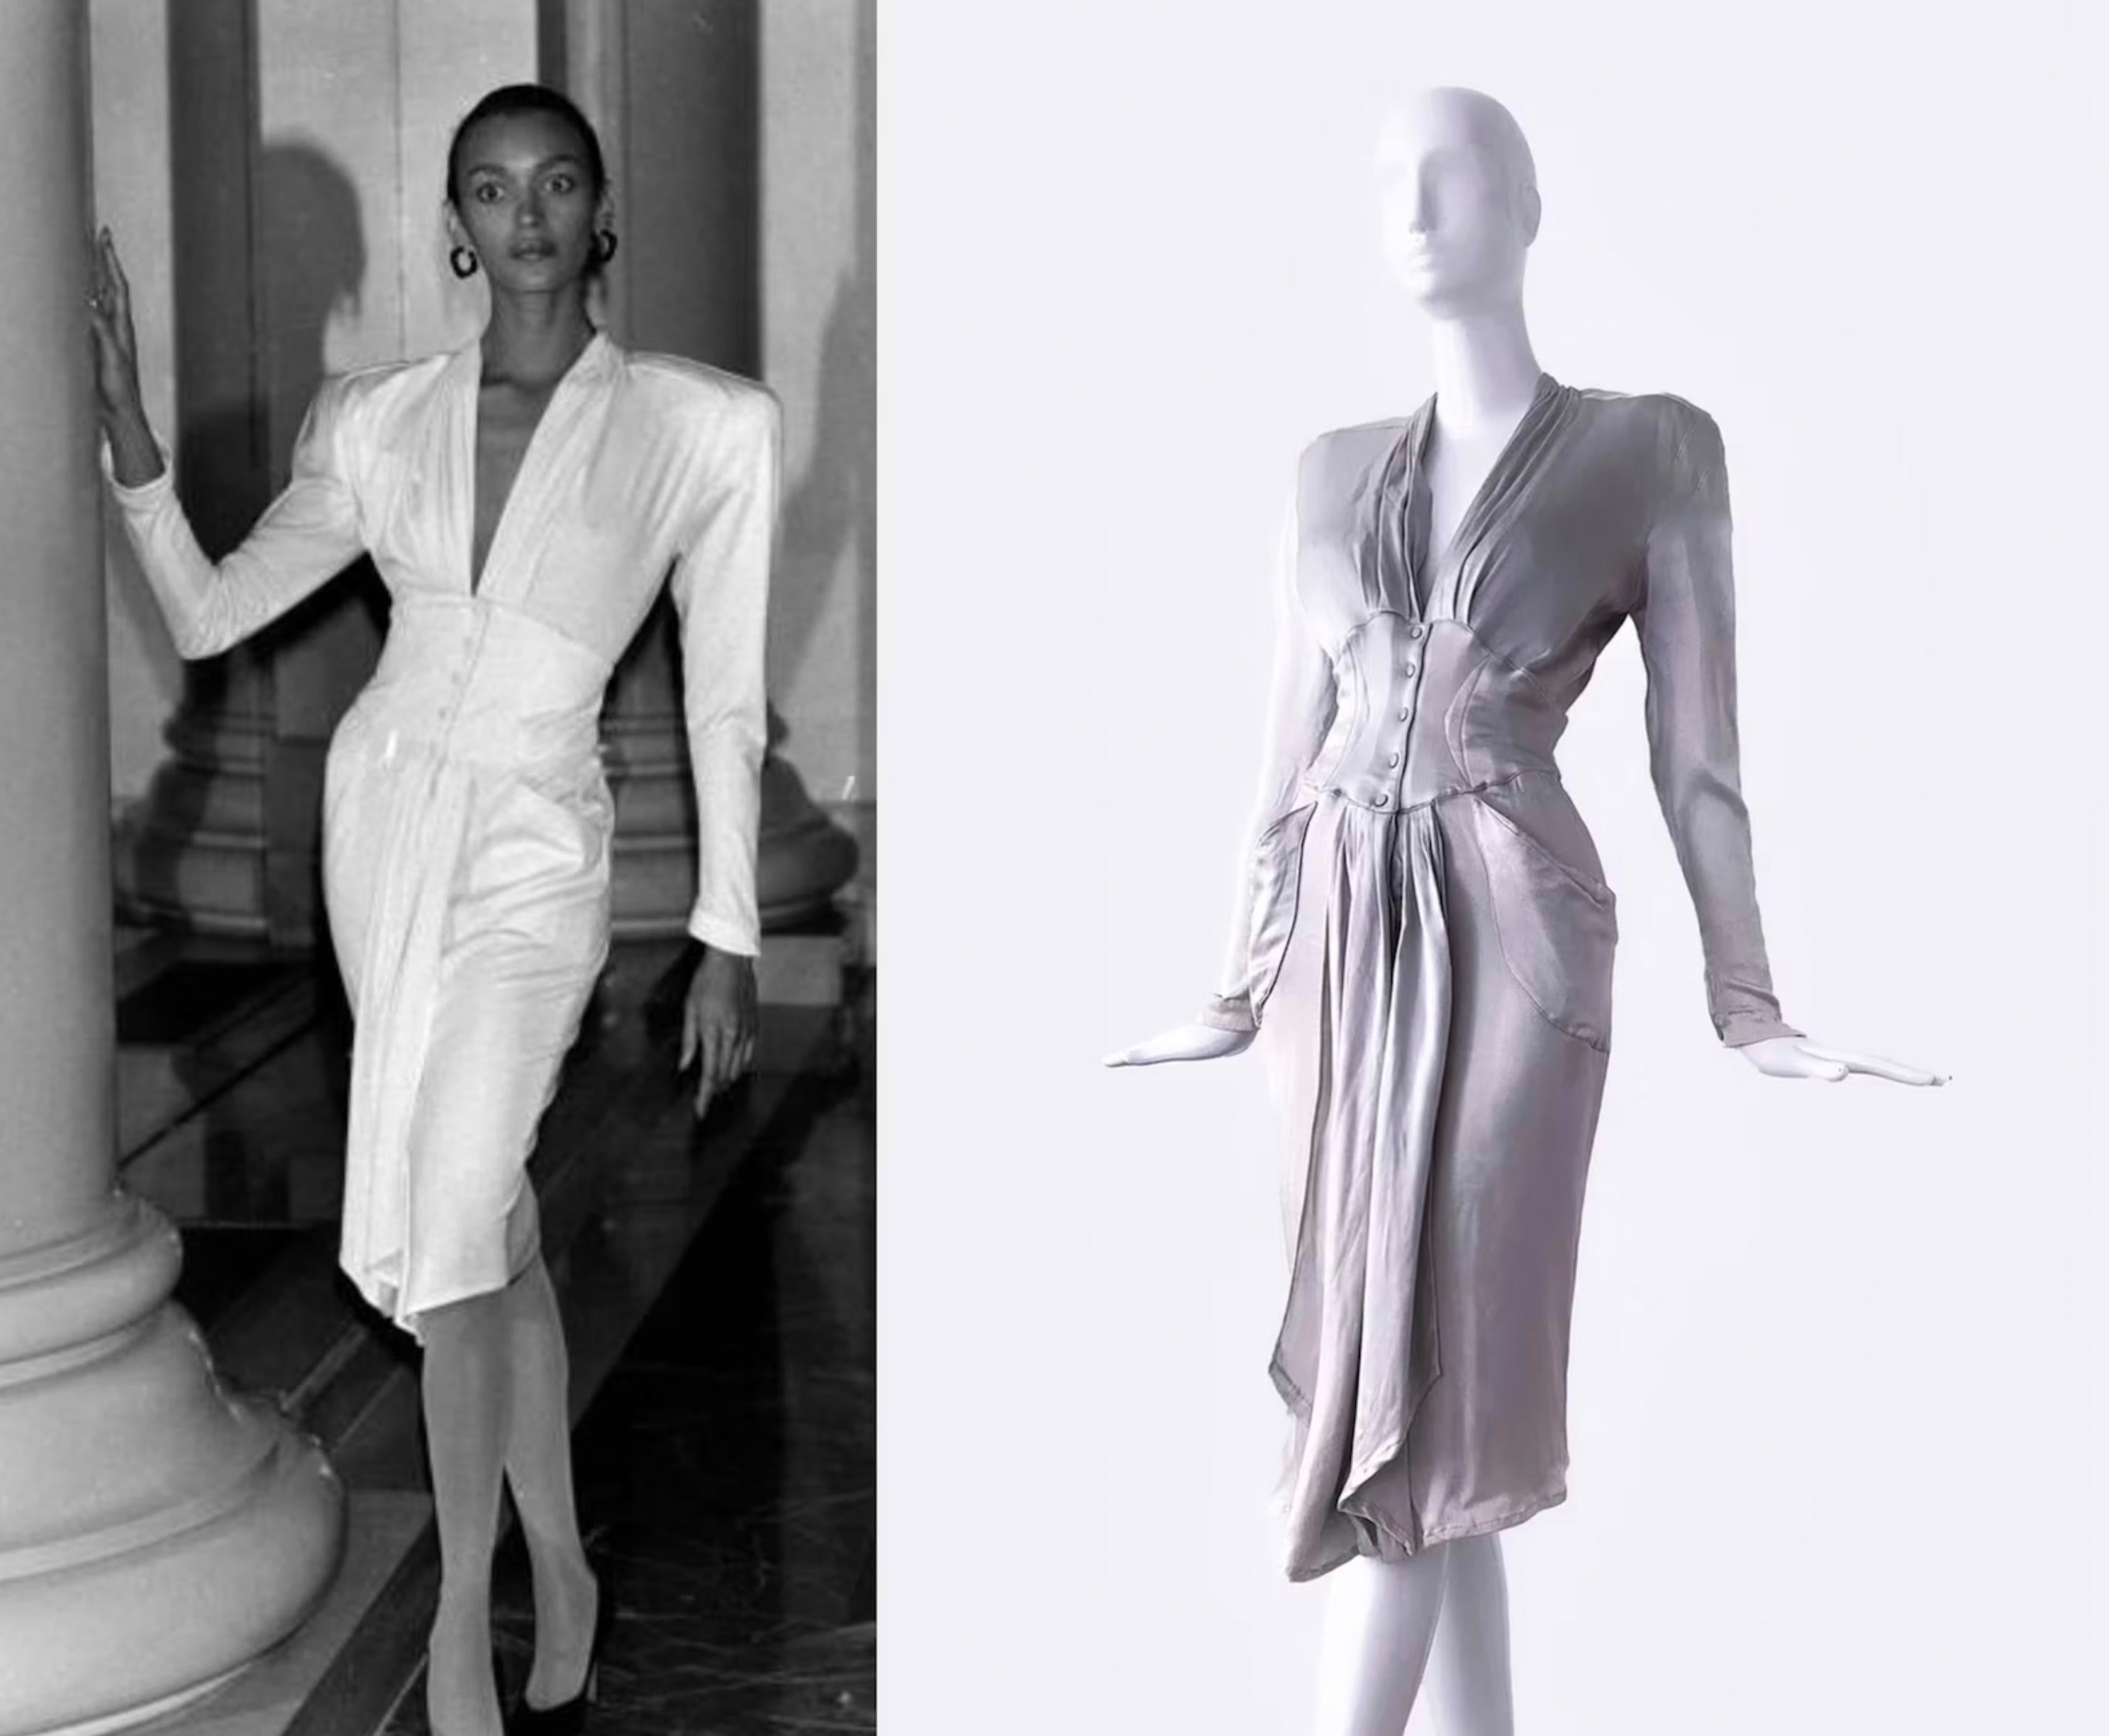 
This Epic Goddess Dress is everything. Extremely rare Thierry Mugler creation, FW 1986 Collection. Liquid silky silver metallic dream in the most stunning fitted shape.
Deep wavy V-Neck and fitted accentuated waist, skirtpart is cascading in the